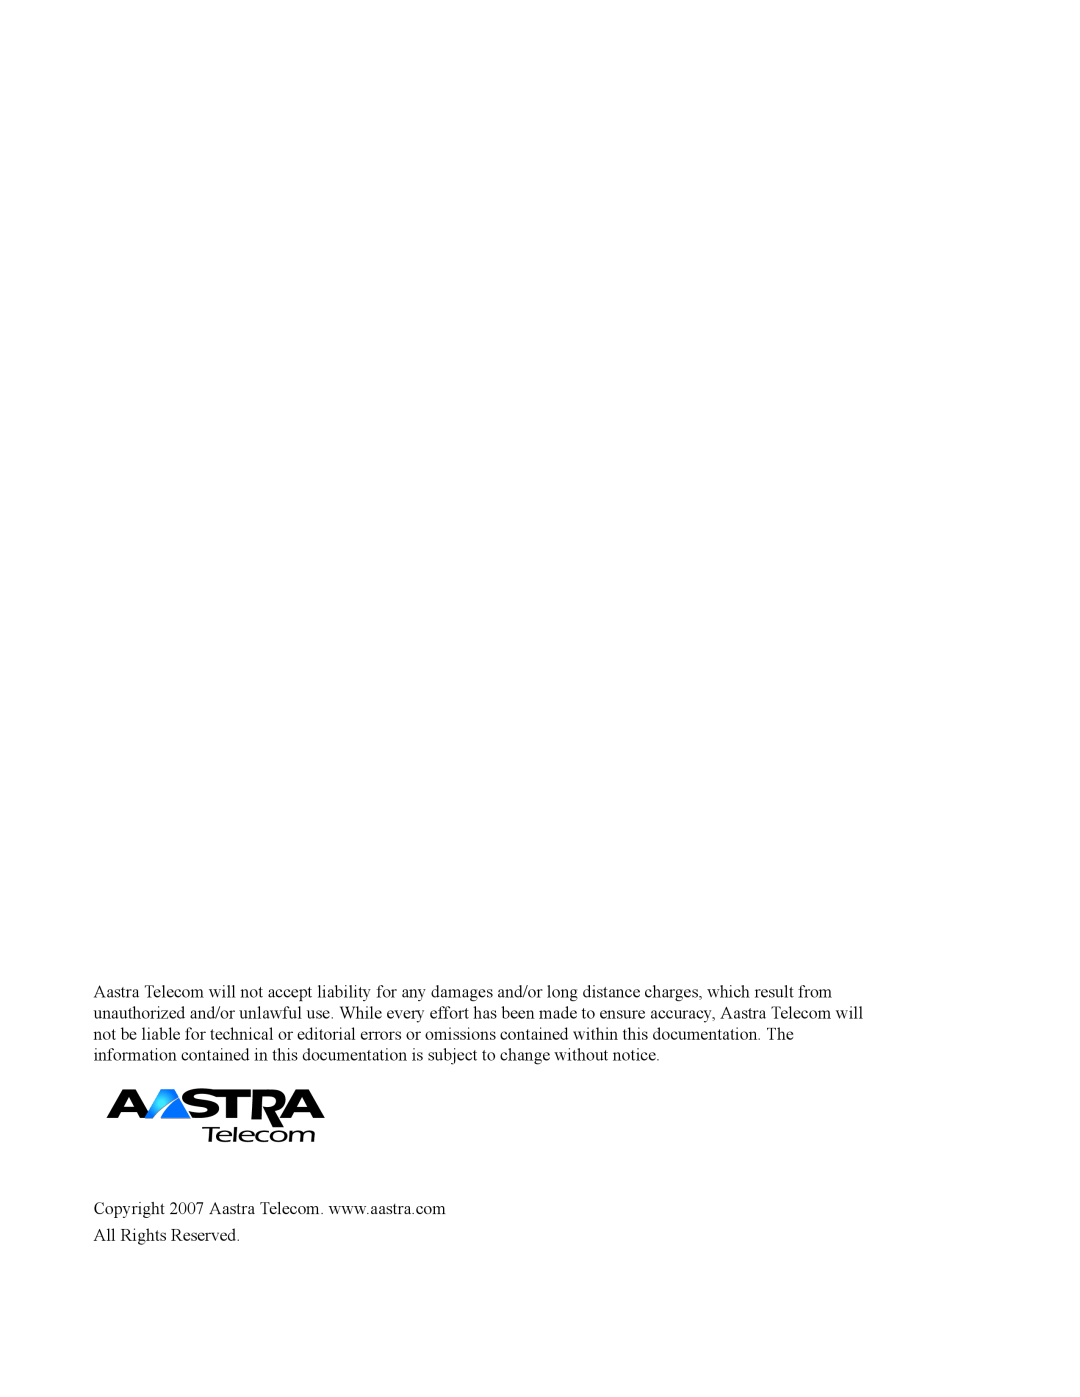 Aastra Telecom 57I CT, 55I manual All Rights Reserved 